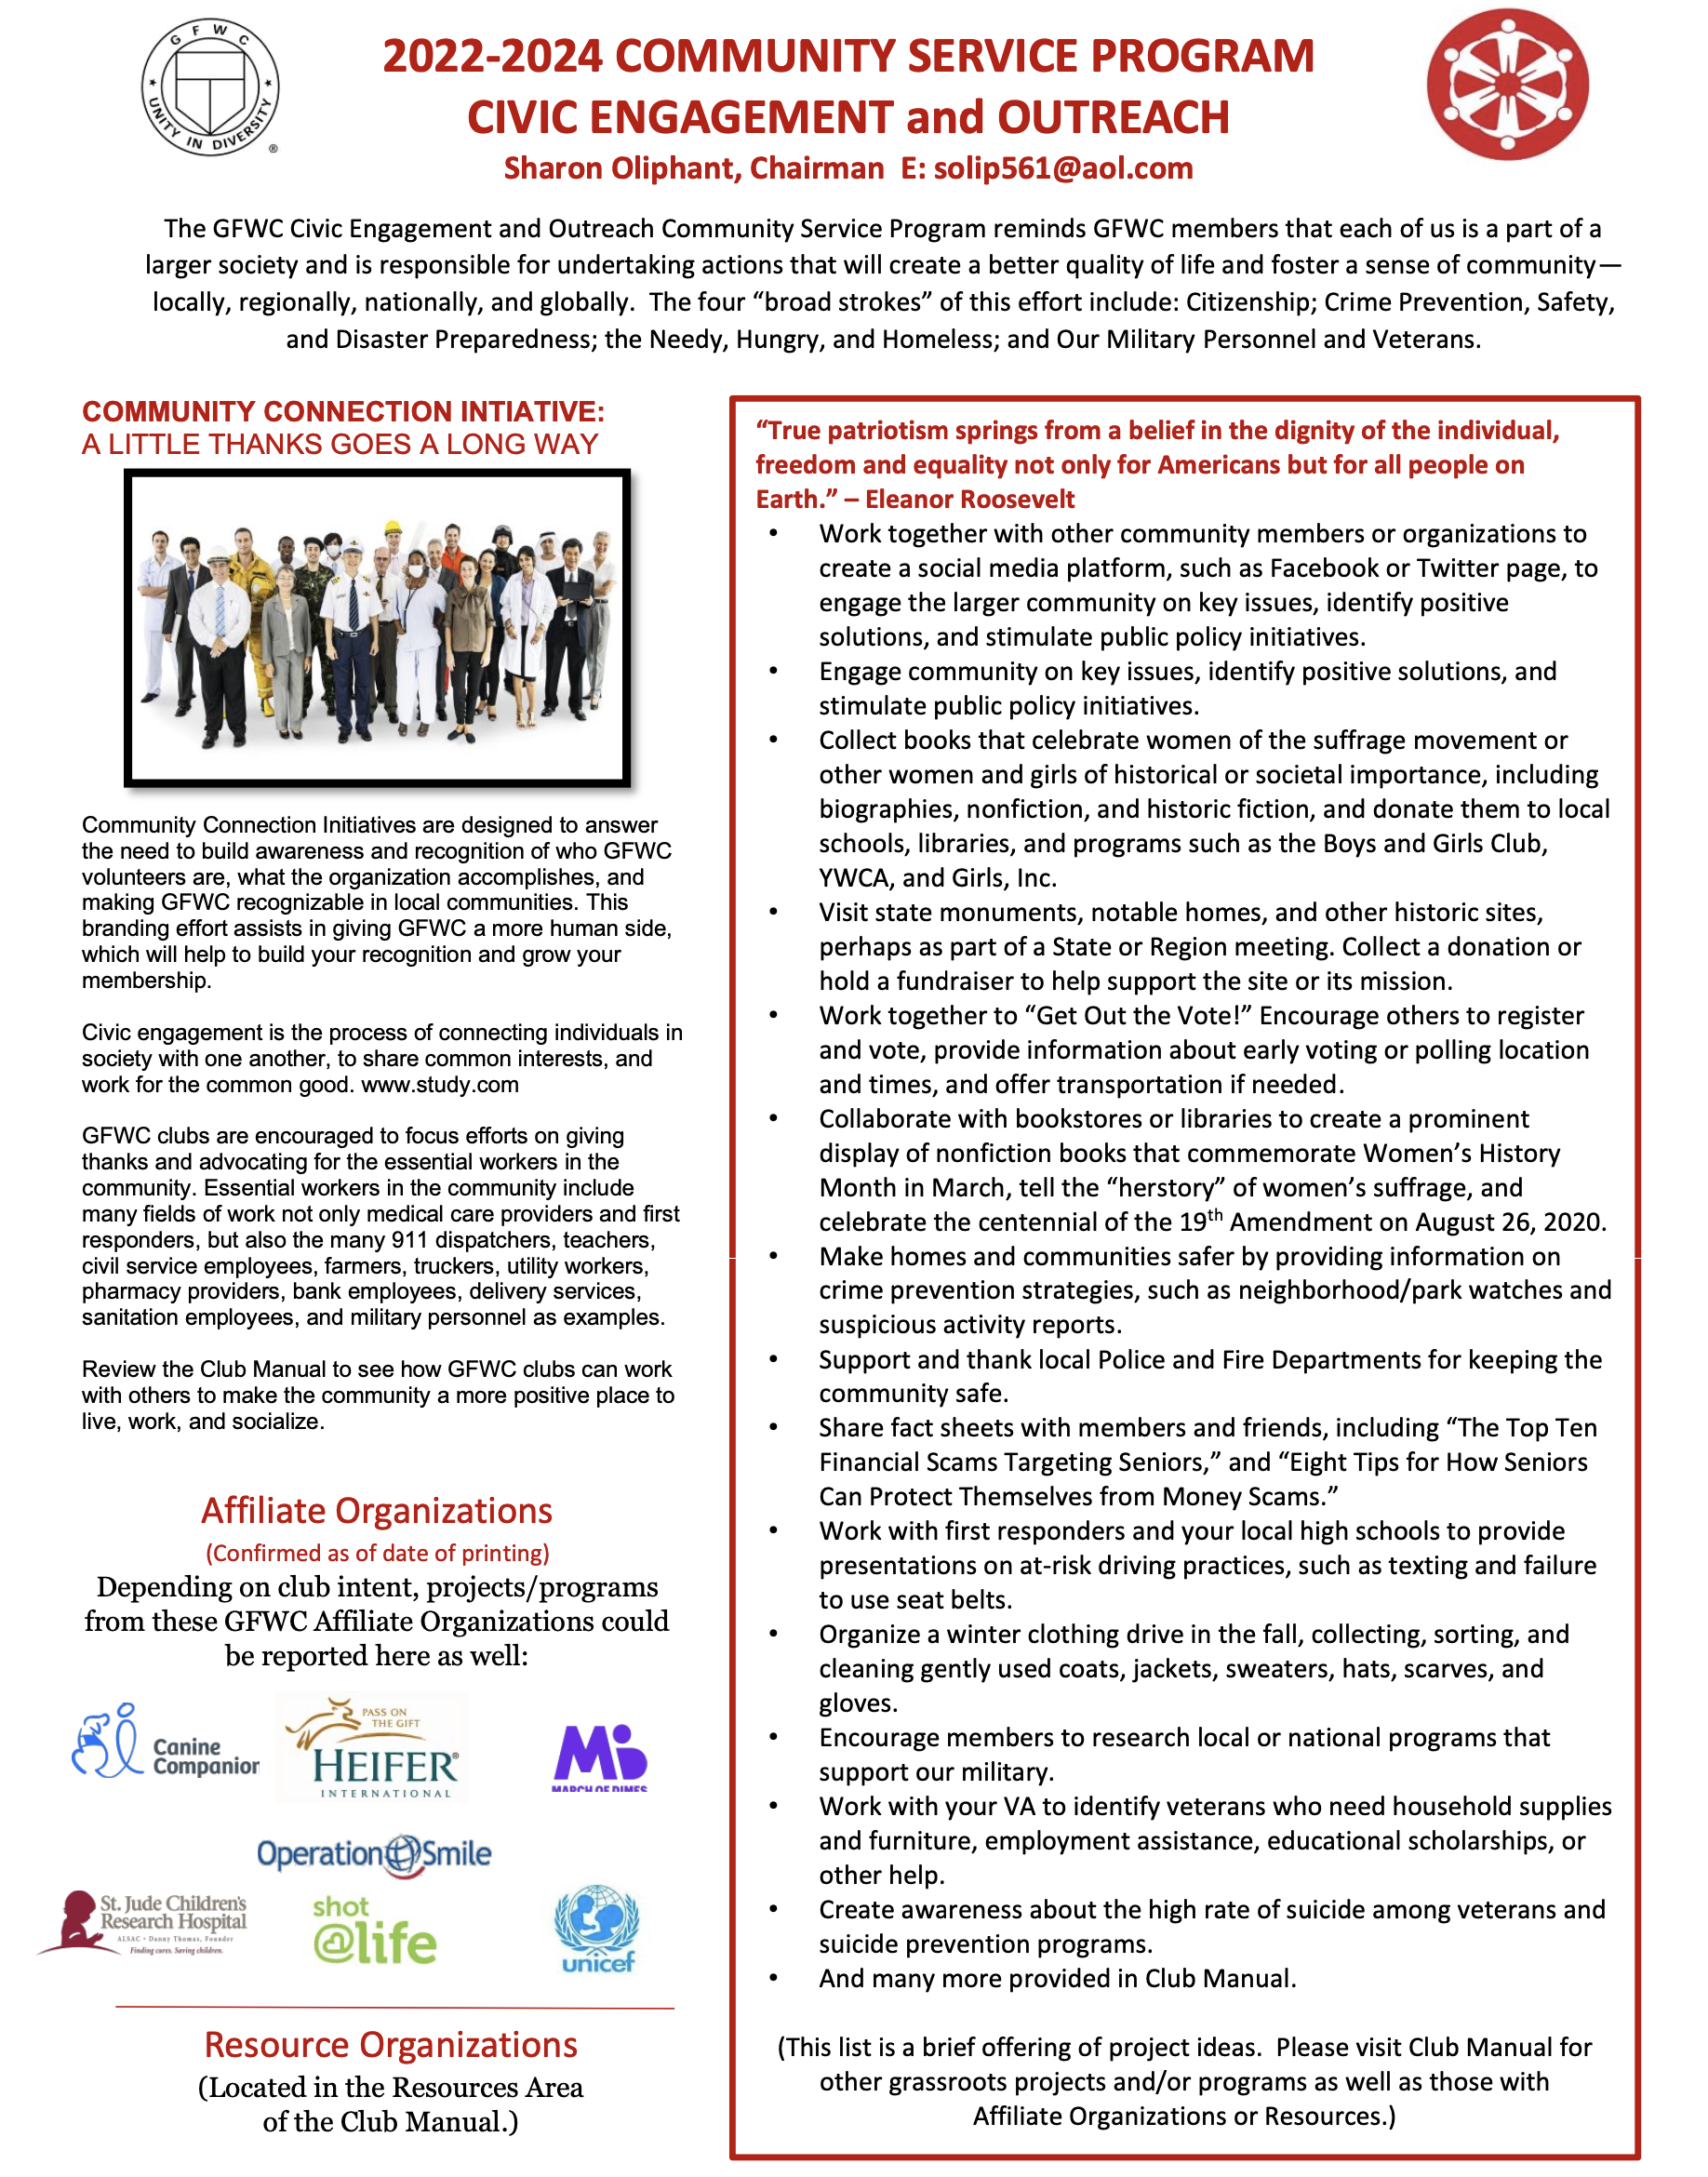 Civic Engagement and Outreach One-Page Handout